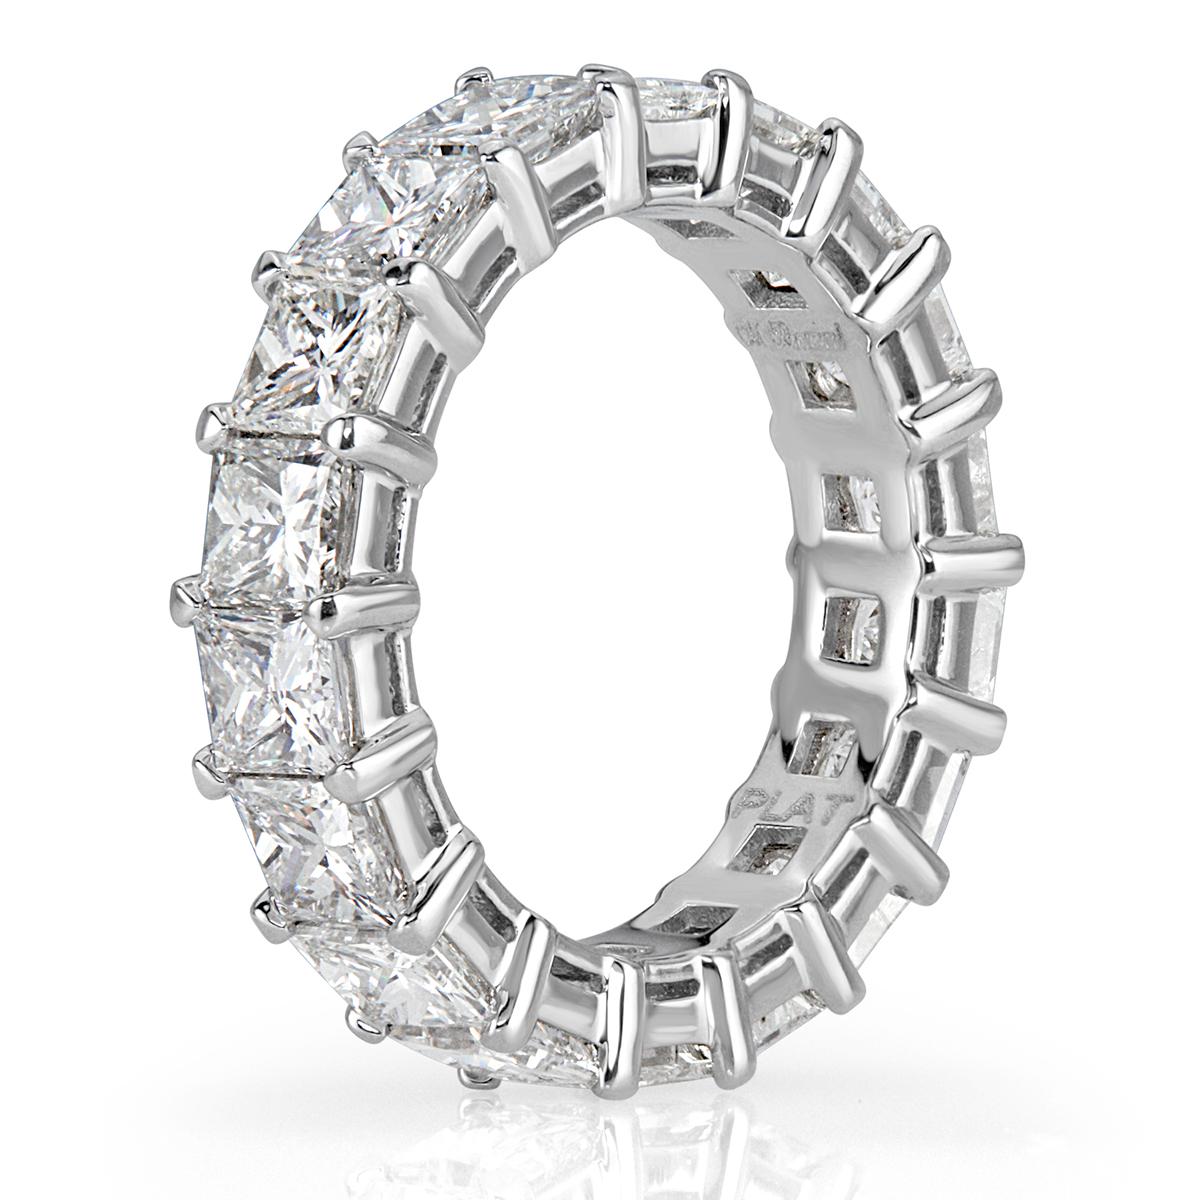 Handcrafted in high polish platinum, this gorgeous diamond eternity band showcases 6.34ct of perfectly matched princess cut diamonds. The diamonds are graded at E-F in color, VS1-VS2 in clarity. All eternity bands are shown in a size 6.5. We custom